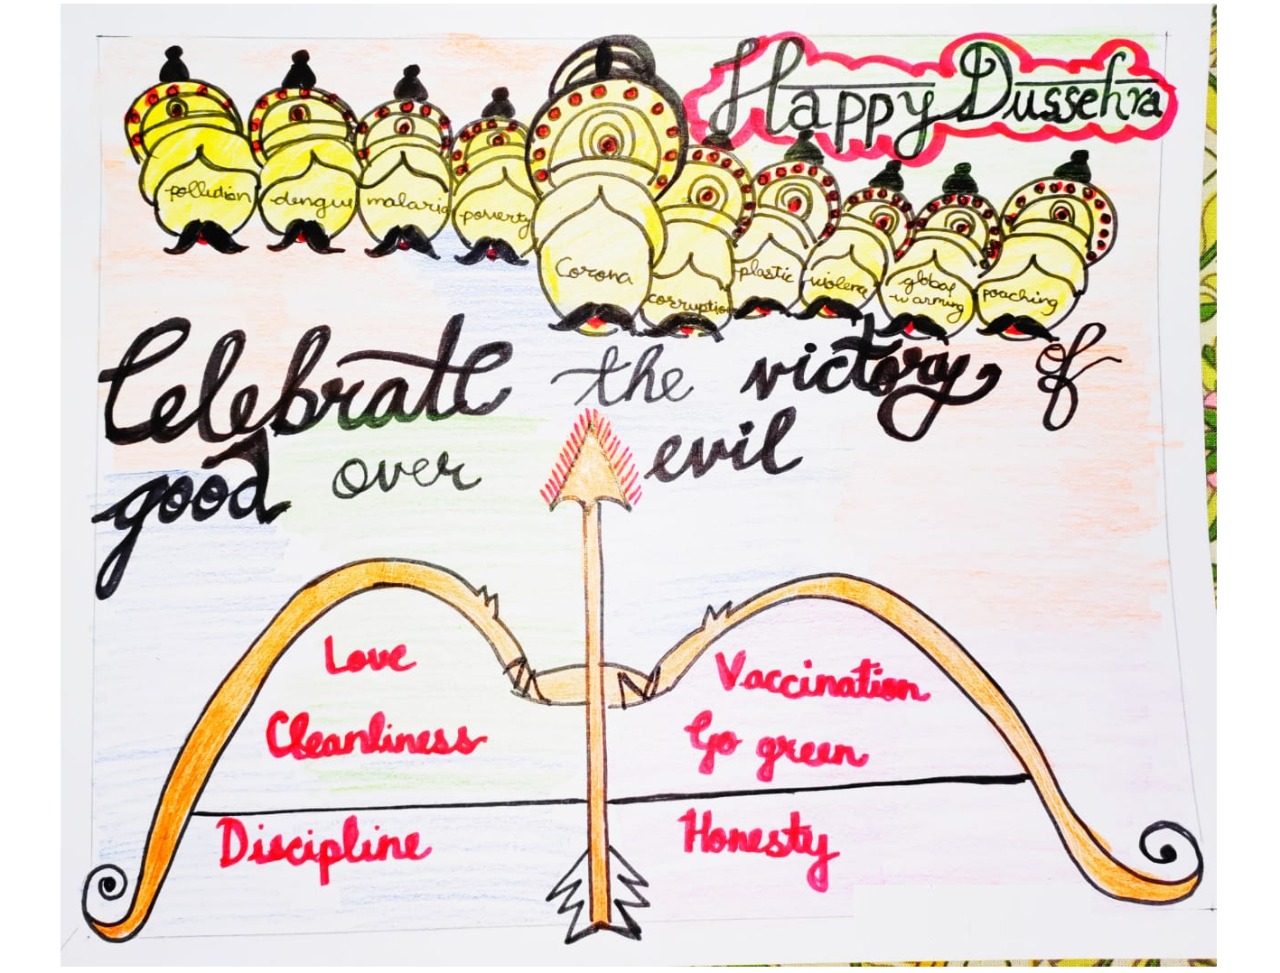 SupDup Kids - Dussehra/Durga Puja Drawing (From Age 10 to... | Facebook